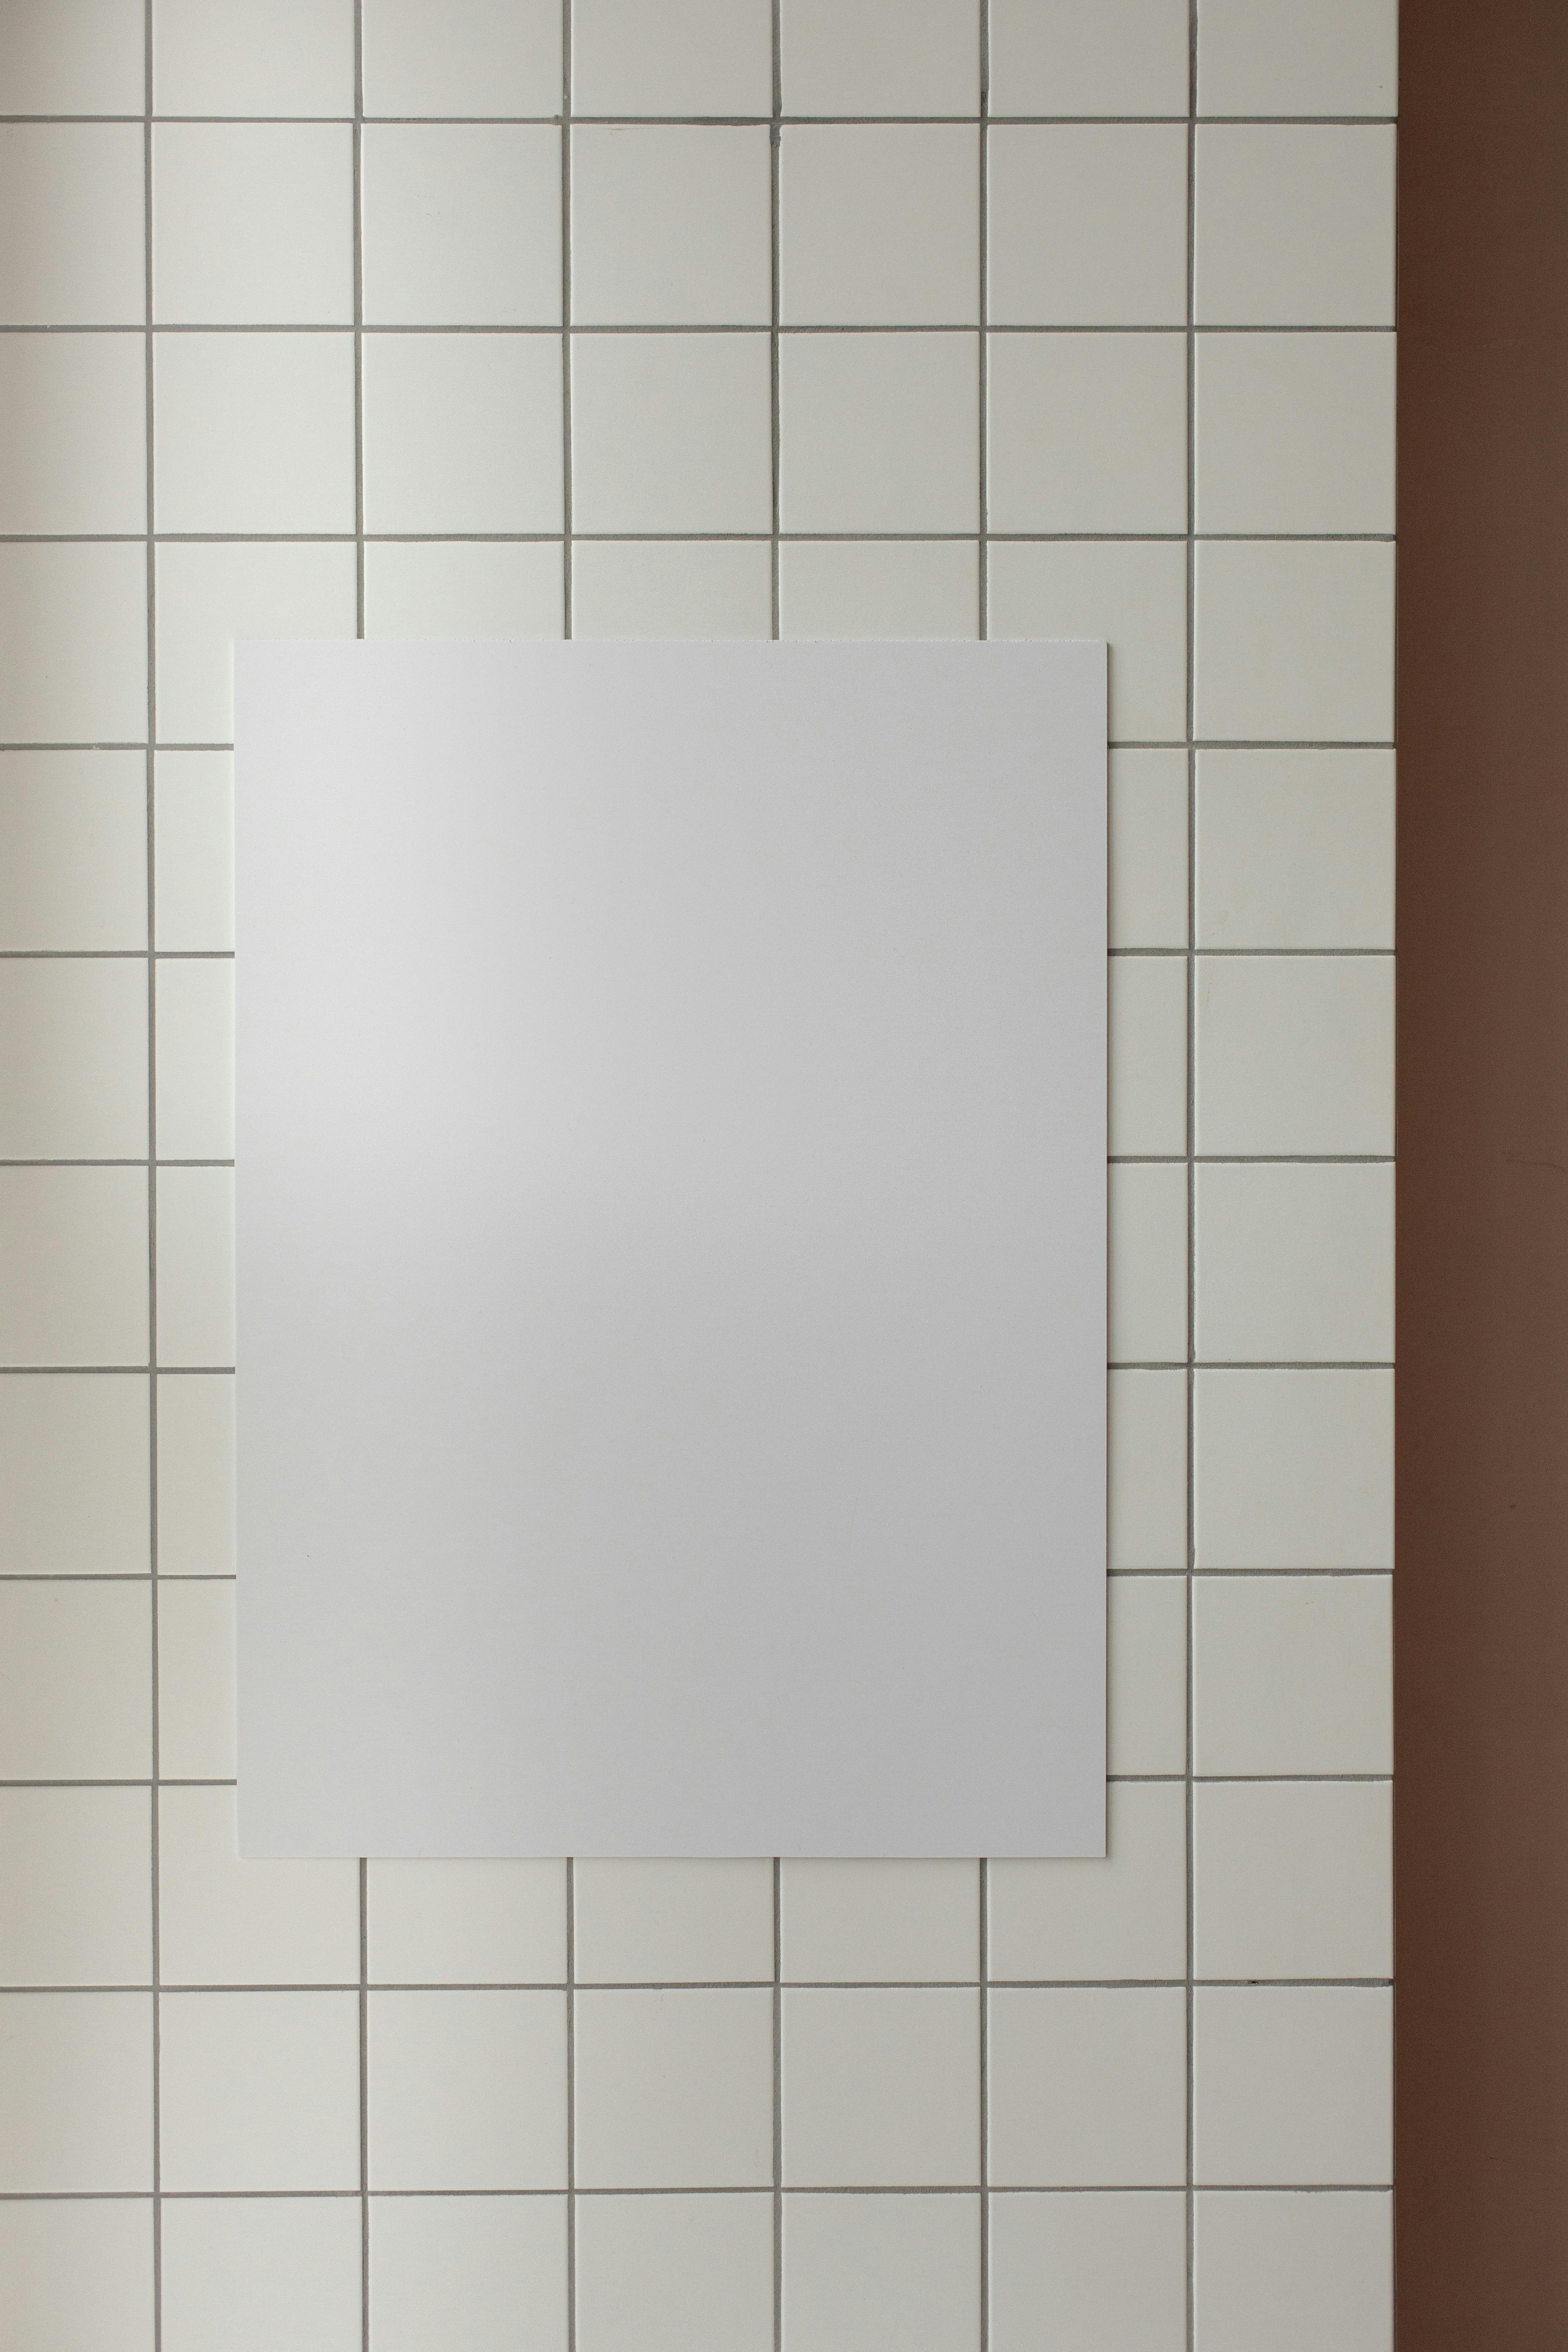 white board on tile wall in room